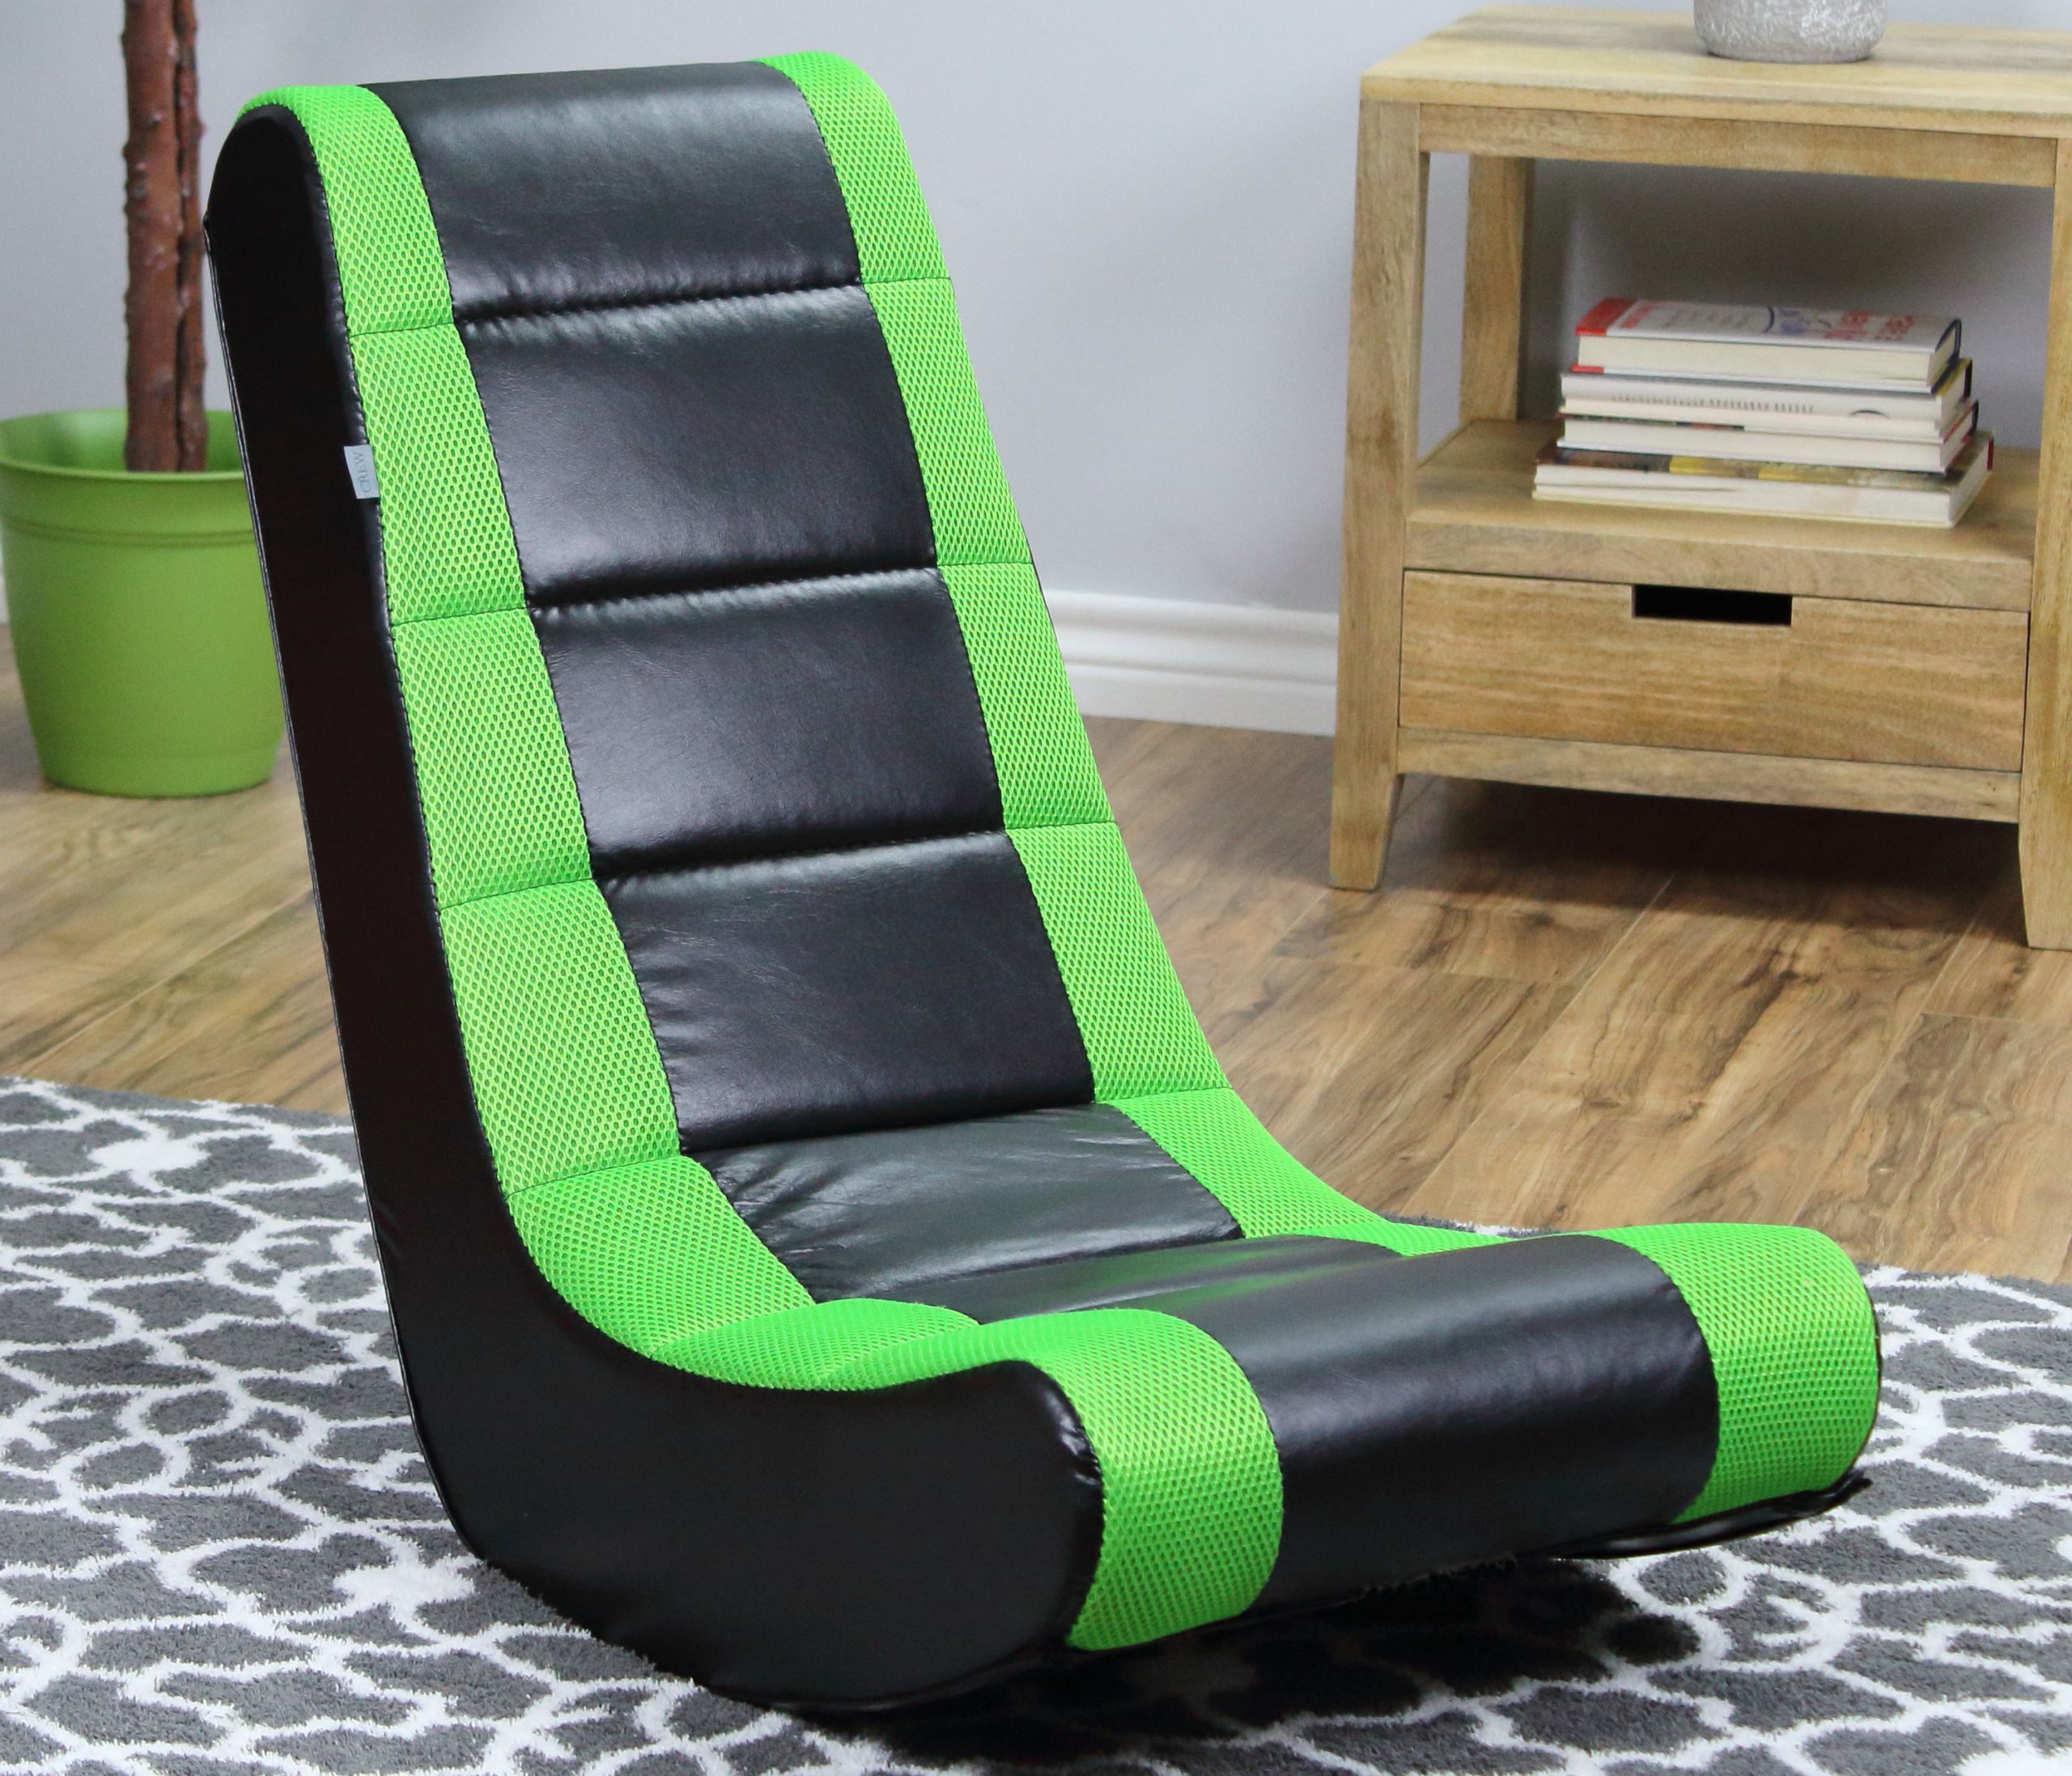 Game Chair For Kids
 fy Gaming Chair Rocking for Boys Teens Gamer Kids